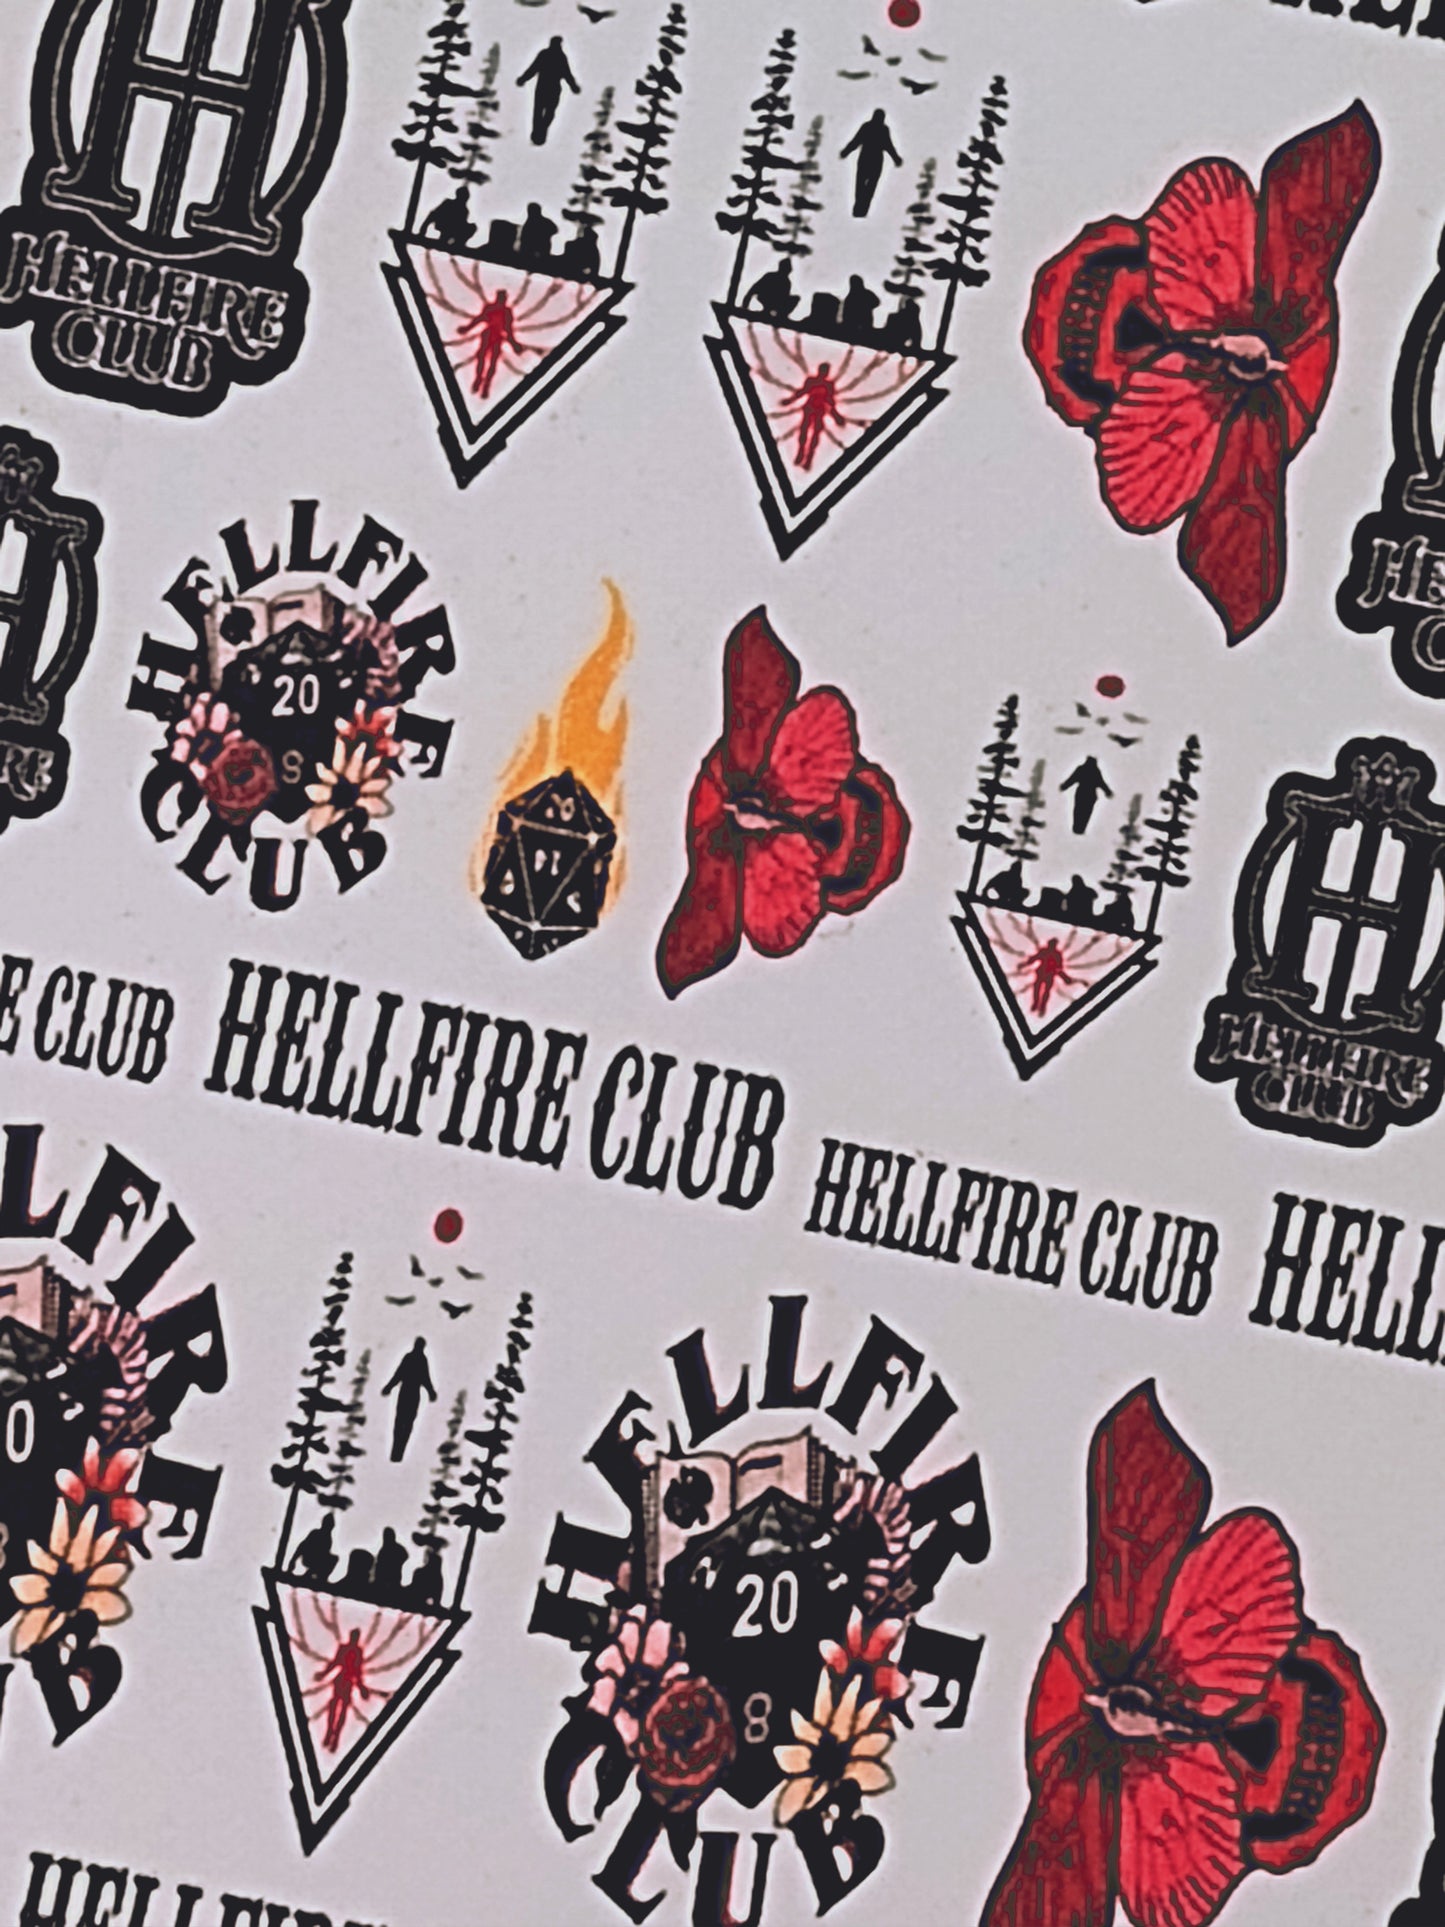 Hell fire Aesthetic- Nail Art Decals